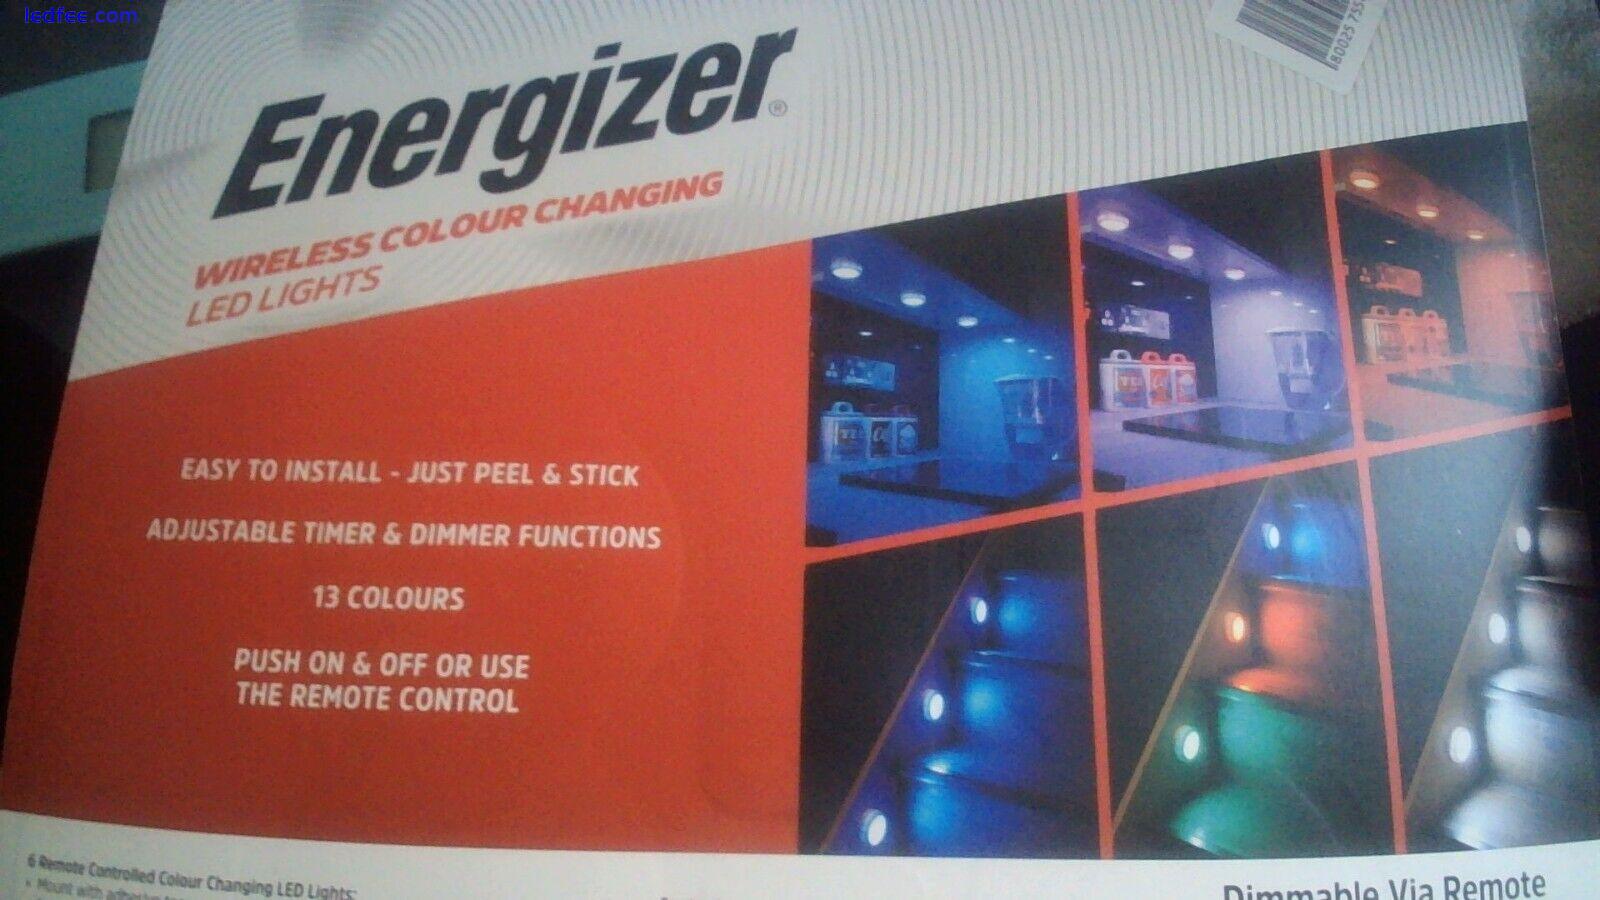 Energizer Wireless Colour Changing LED Lights. 13 colours. 6 lights.18 batteries 2 